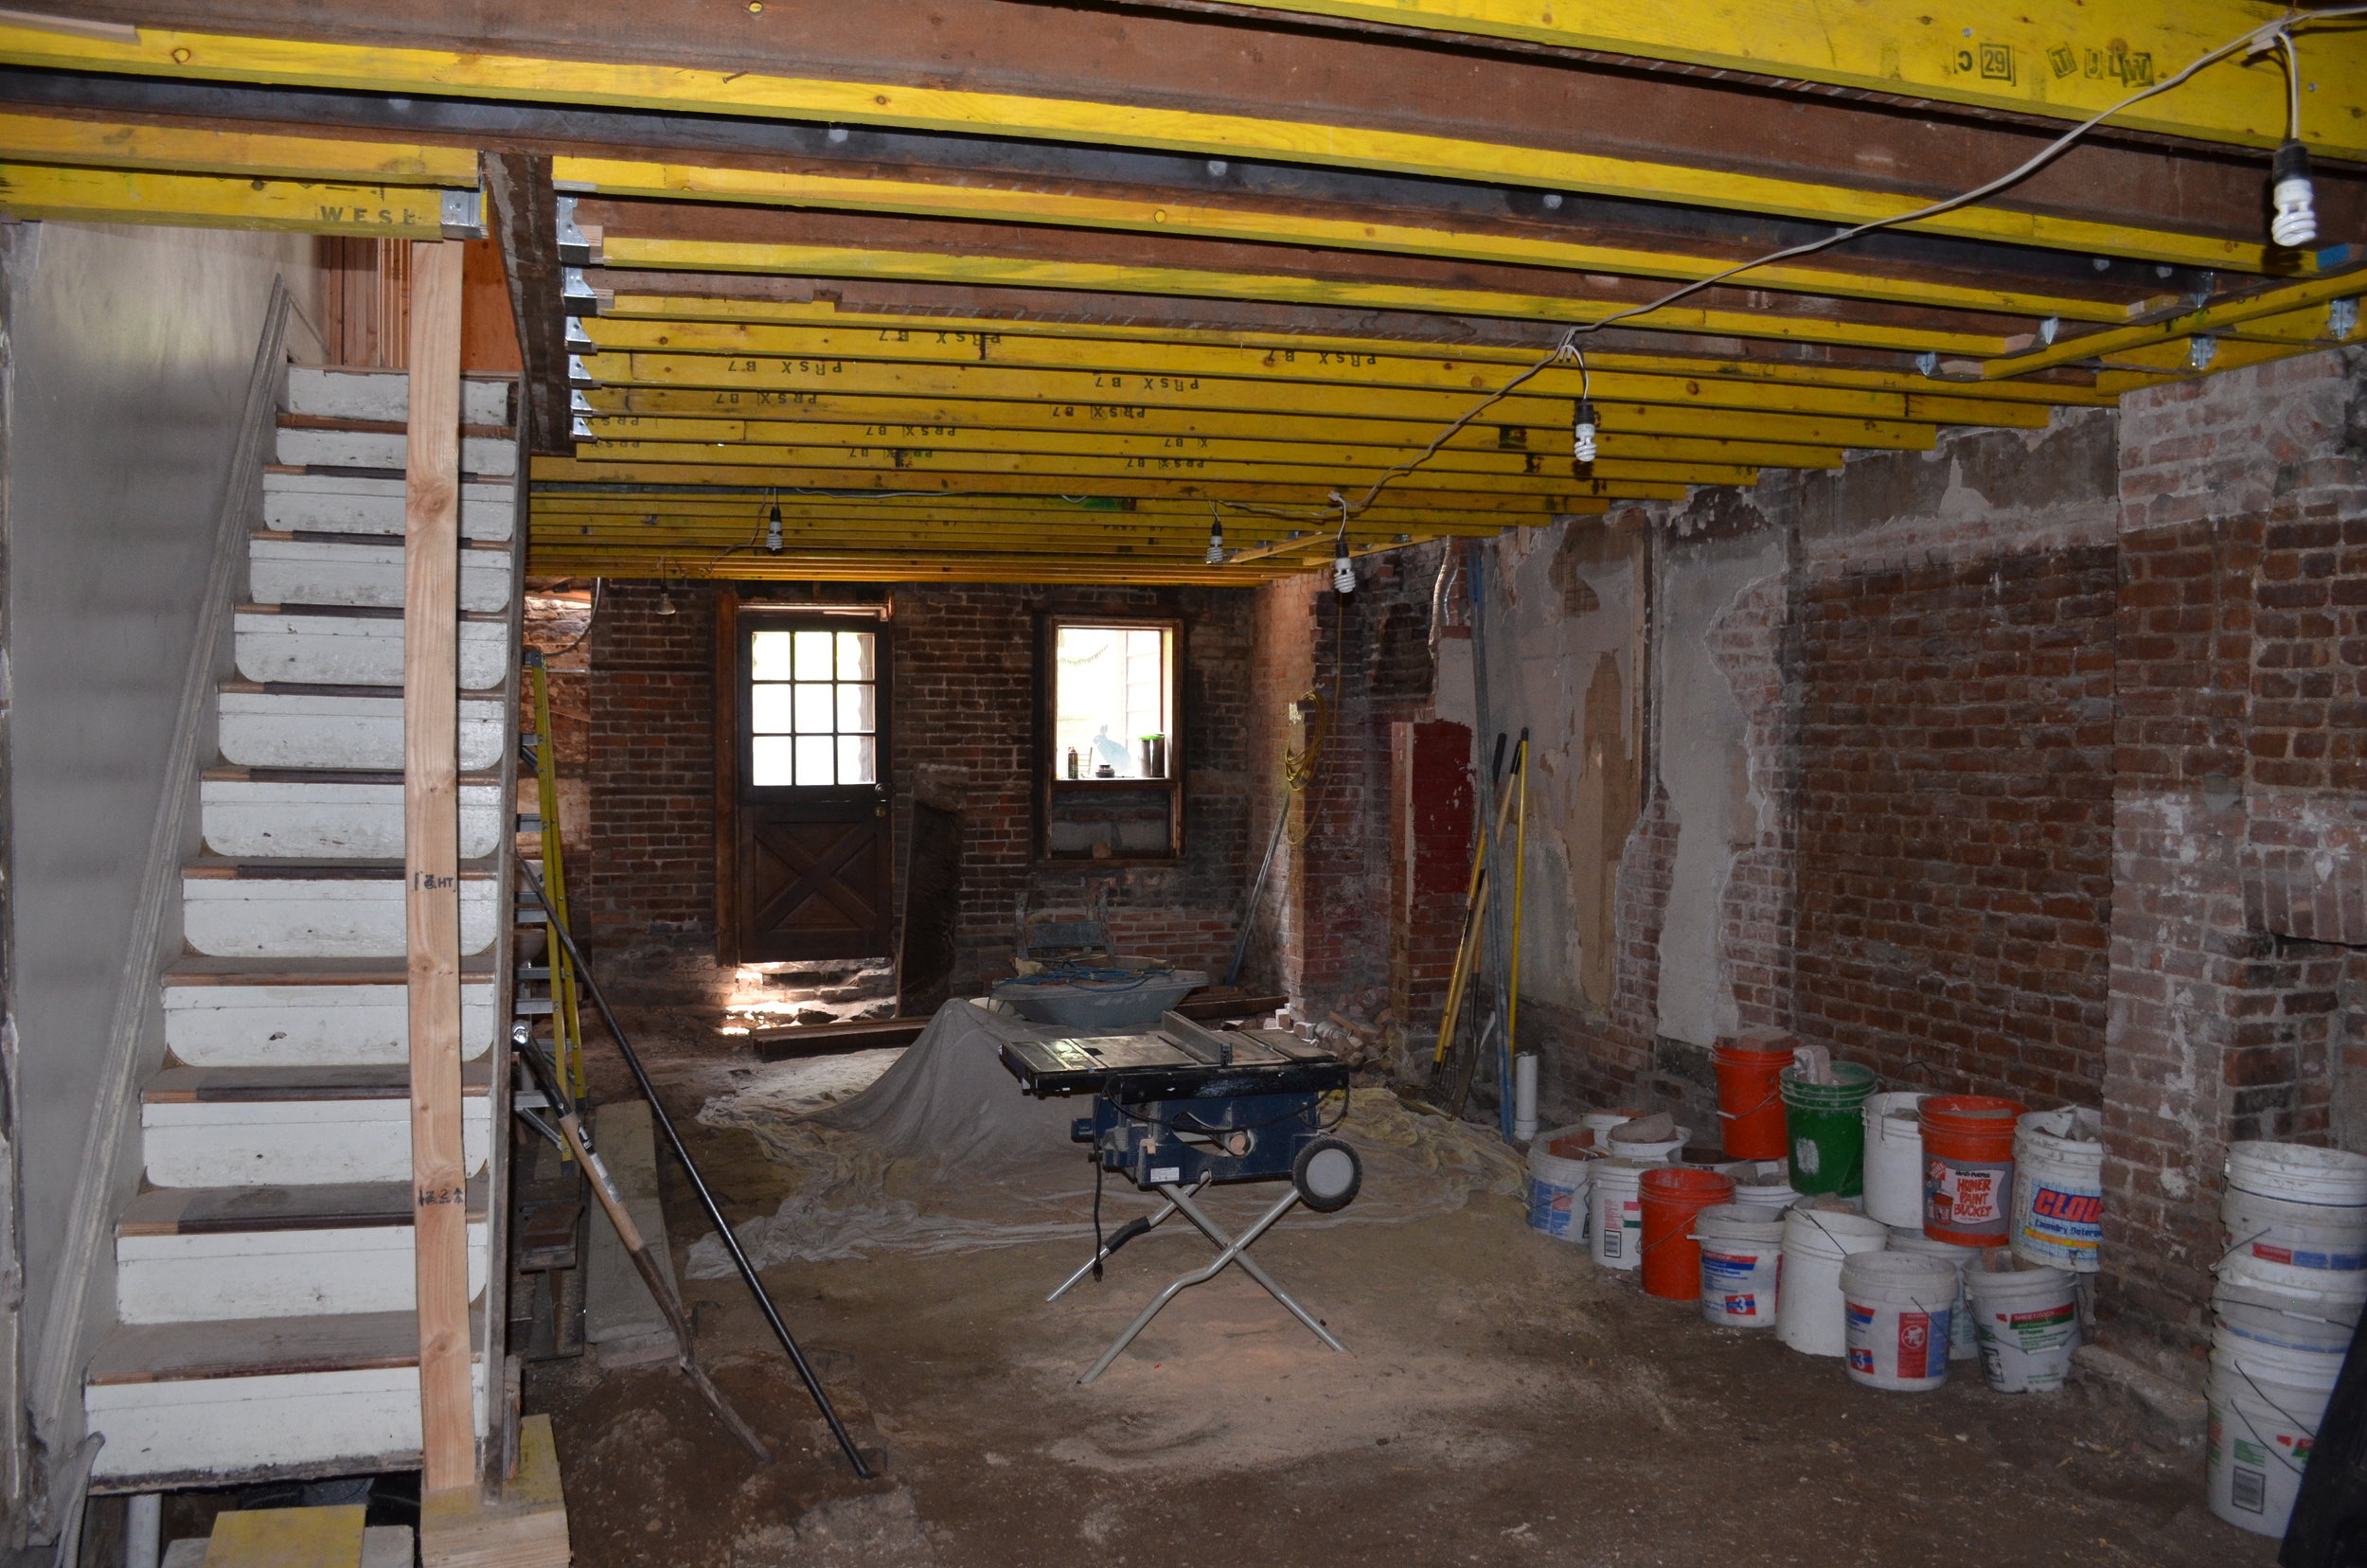 Microlam sistering of all existing floor joists, fireplace left partially demo'd. All narrow time-period staircases carefully preserved in the house to remain grandfathered in code compliance